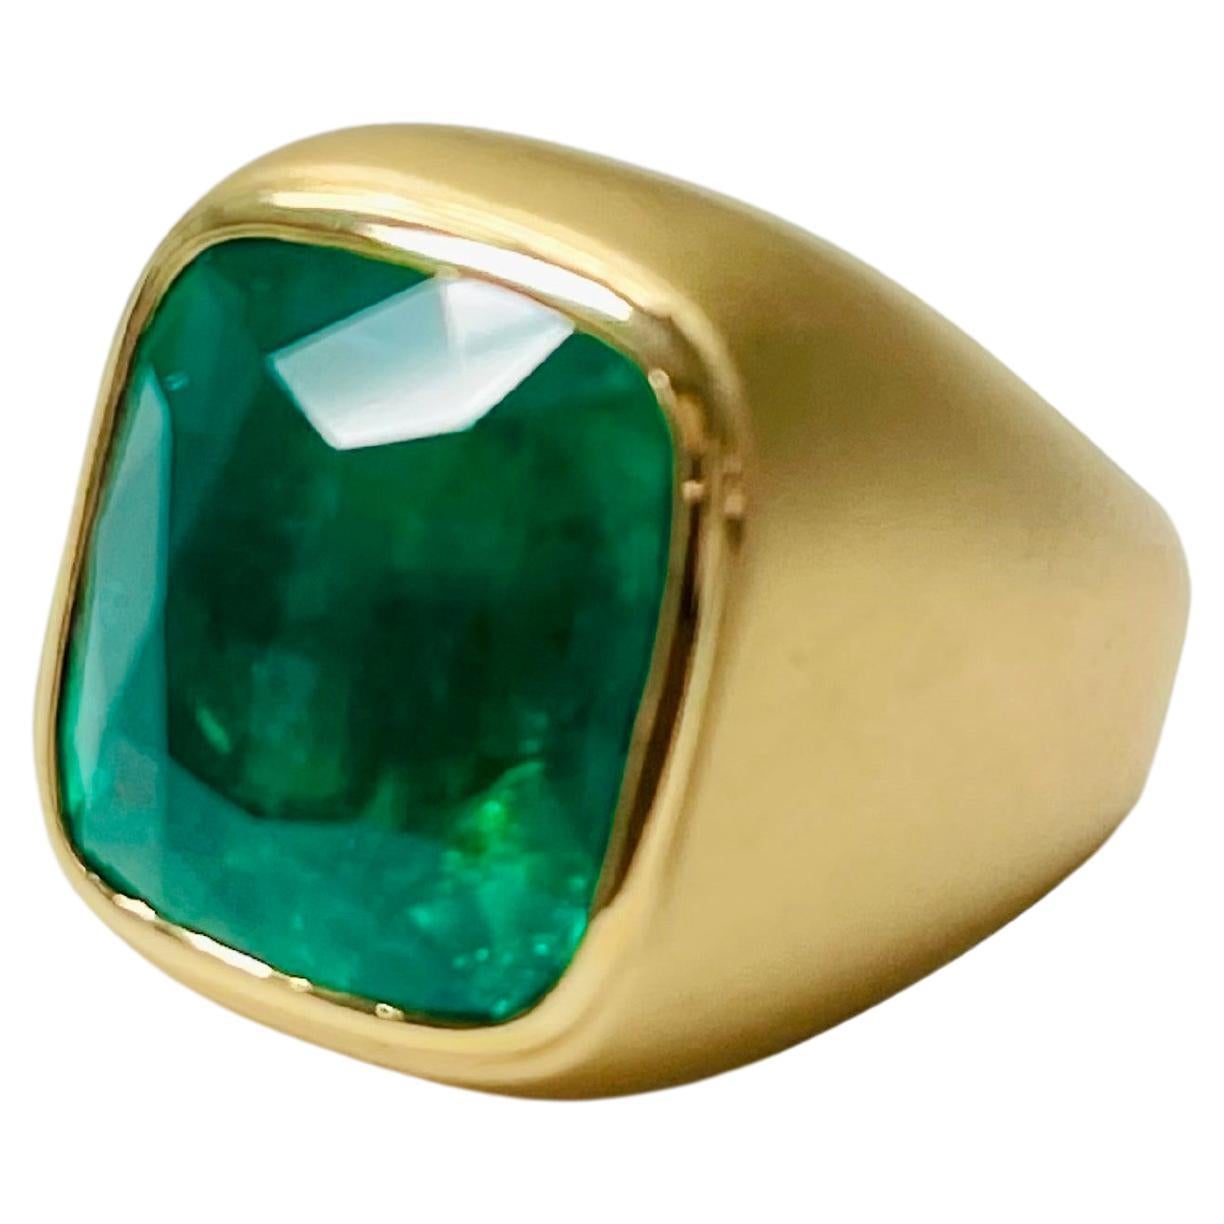 Exceptionally beautiful 13.38 Carat Colombian Emerald Engagement ring handcrafted in 18k yellow gold. AGL CERTIFIED . 

Colombian Emerald : 13.38 carat 
Measurements of Emerald : 15.23 x 13.51 x 9.68 mm 
Ring size : 6.25 
